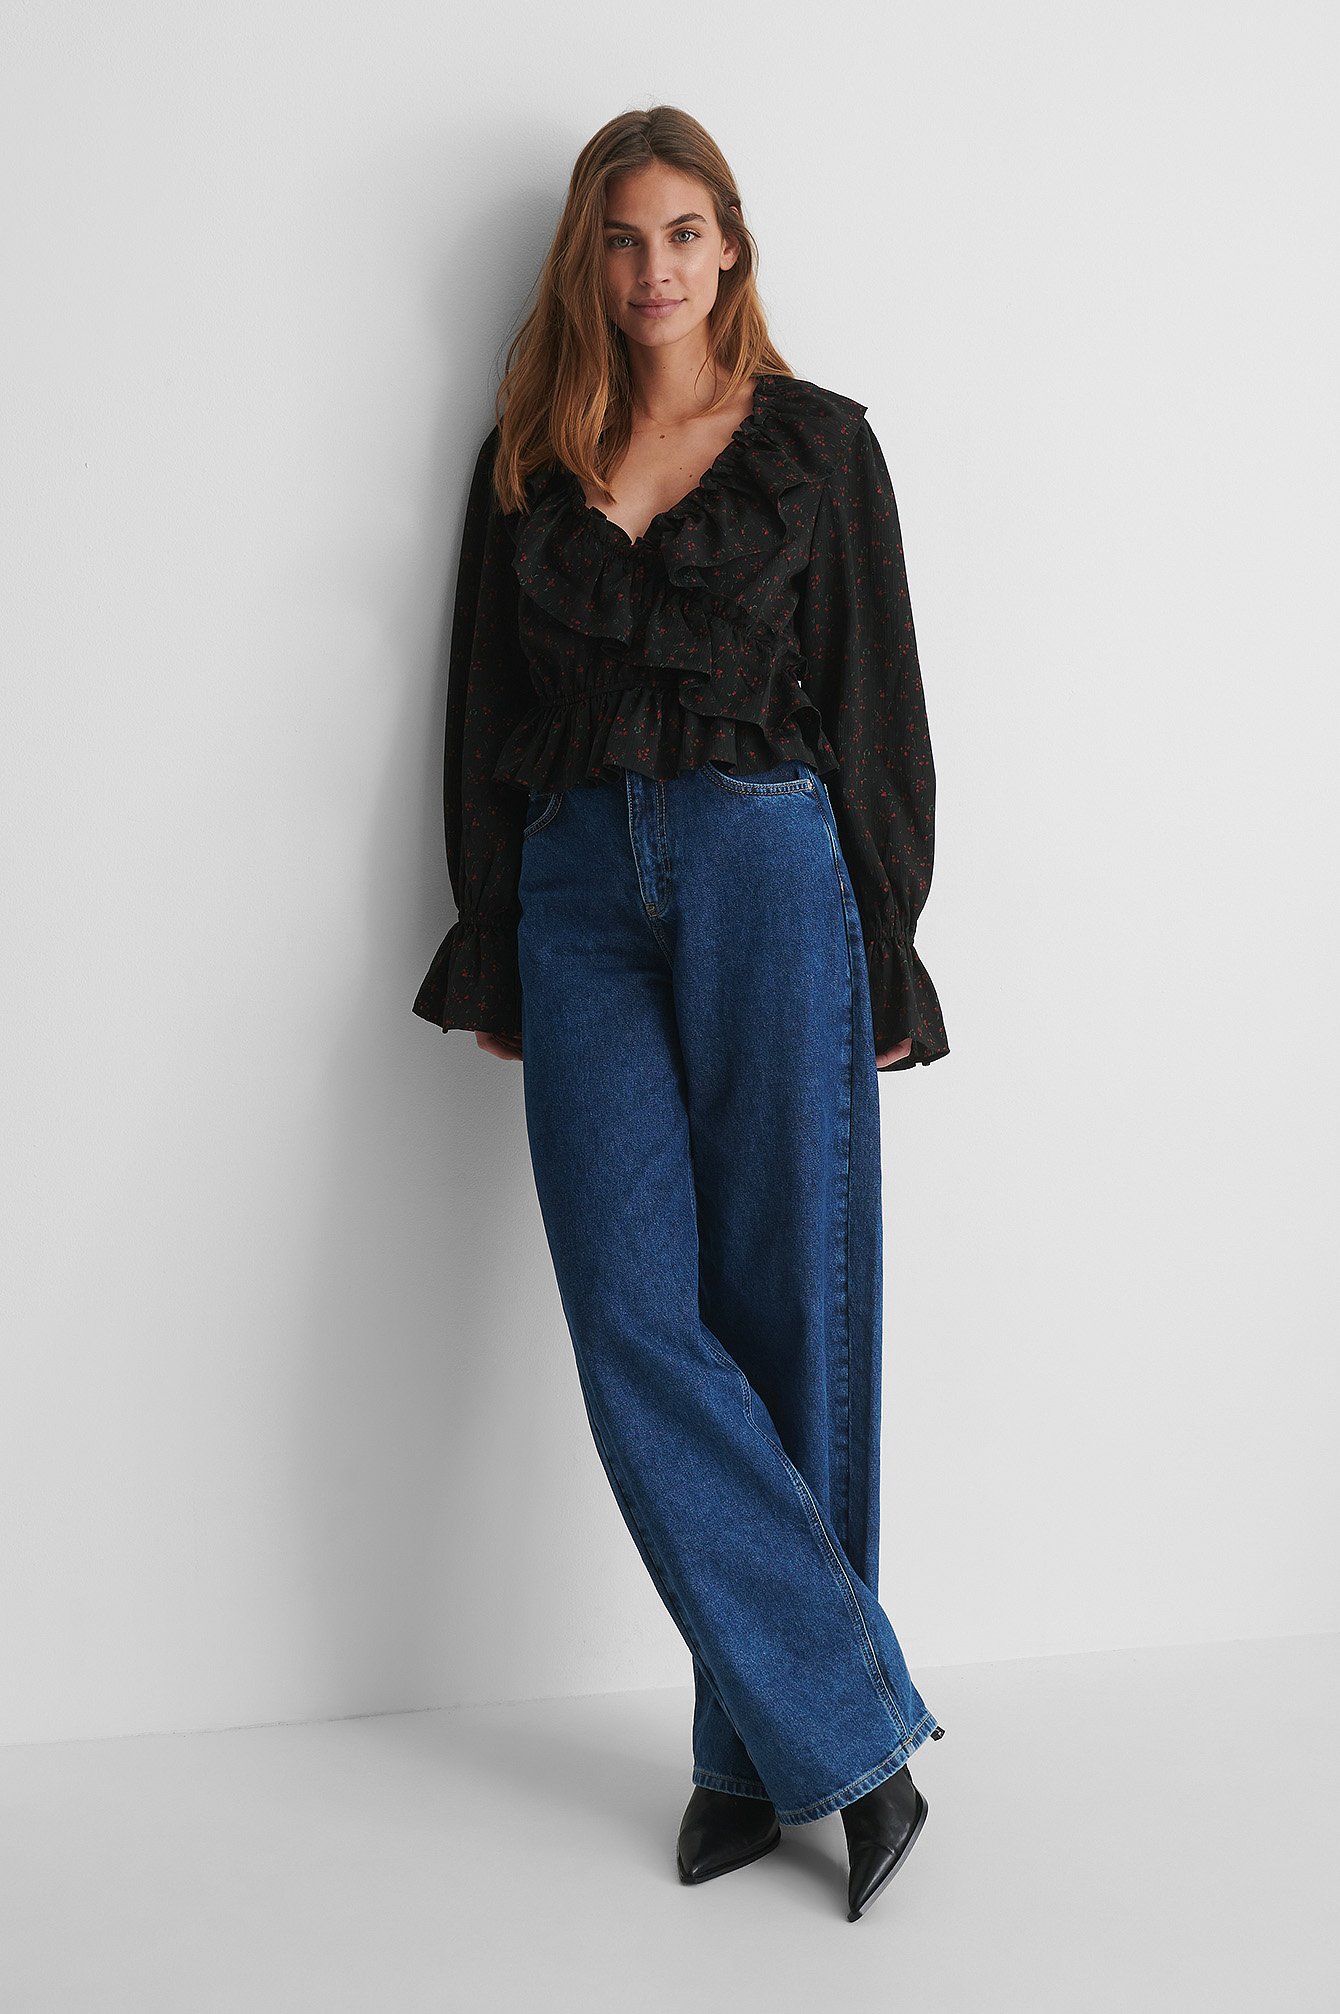 Frill Drawstring Blouse with Wide Jeans.